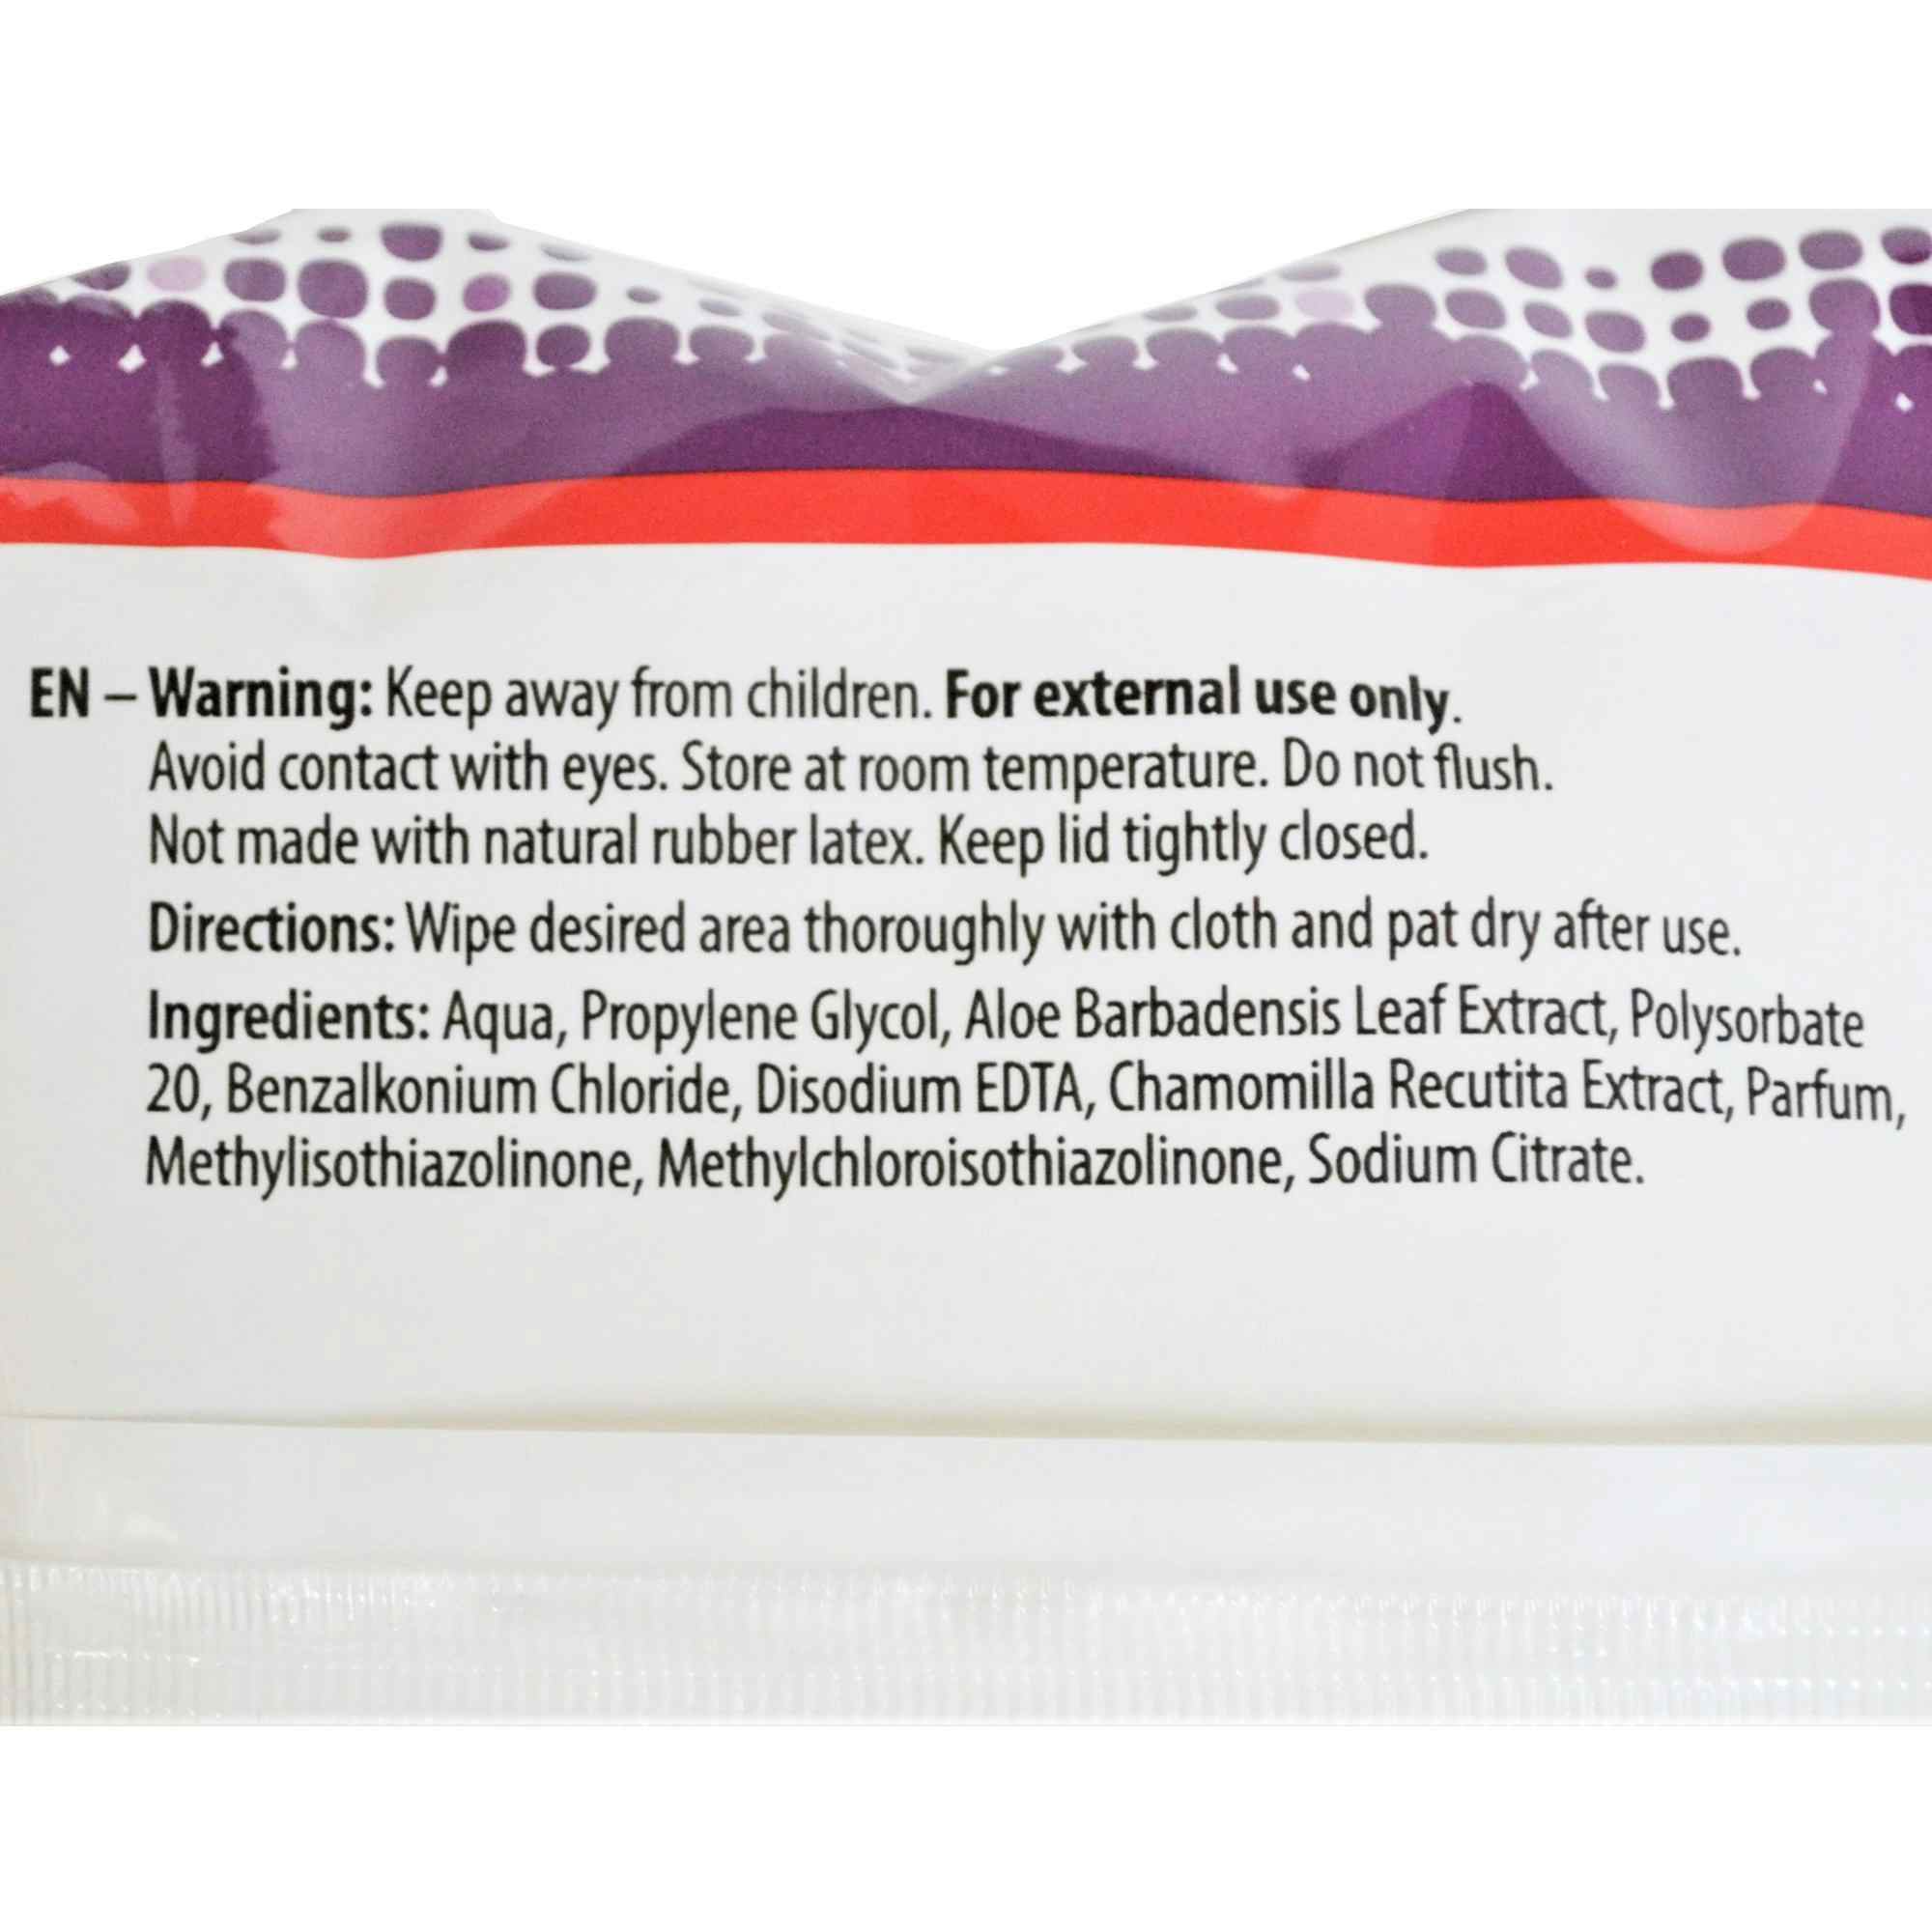 Cardinal Personal Cleansing Wipes, Scented